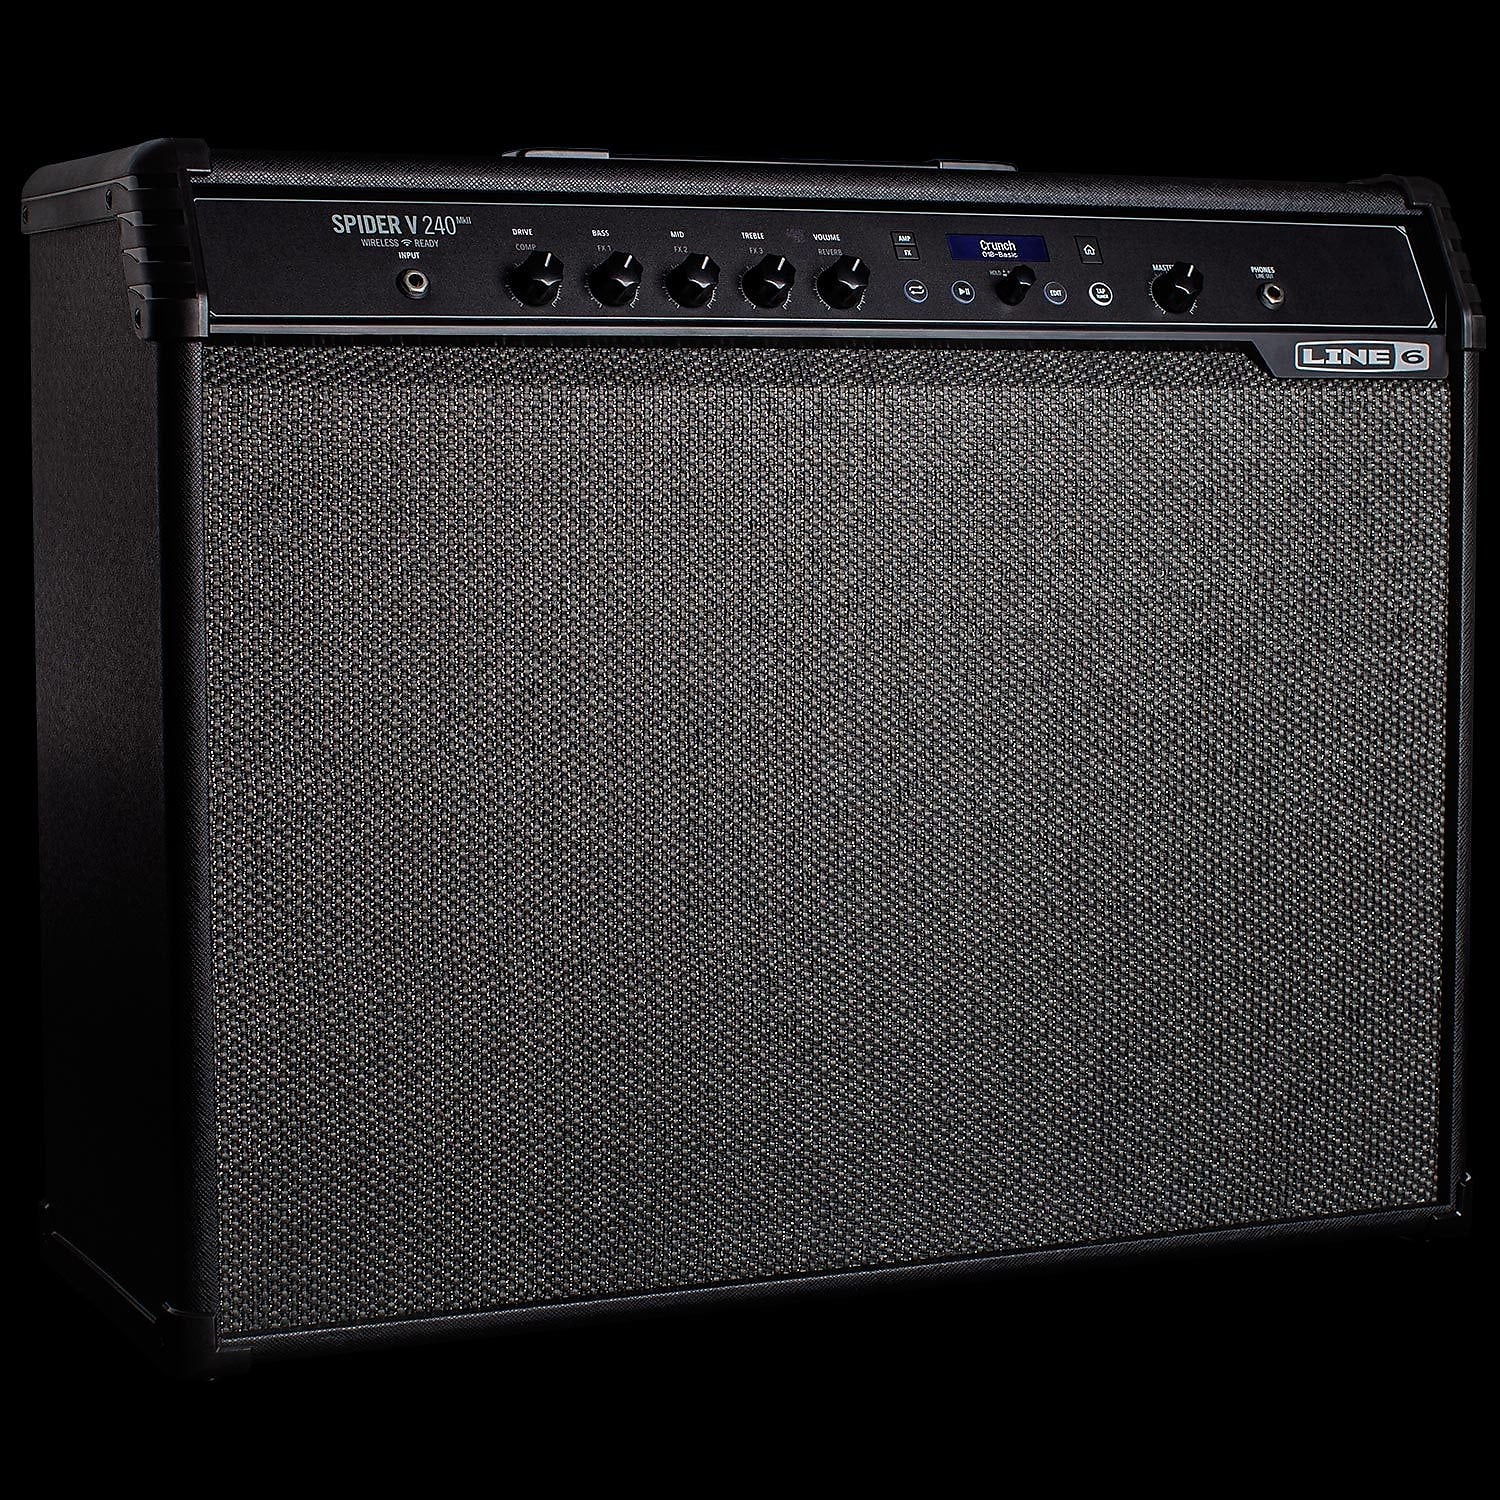 Line 6 Spider V 240 MkII Guitar Amp with Modeling and Effects